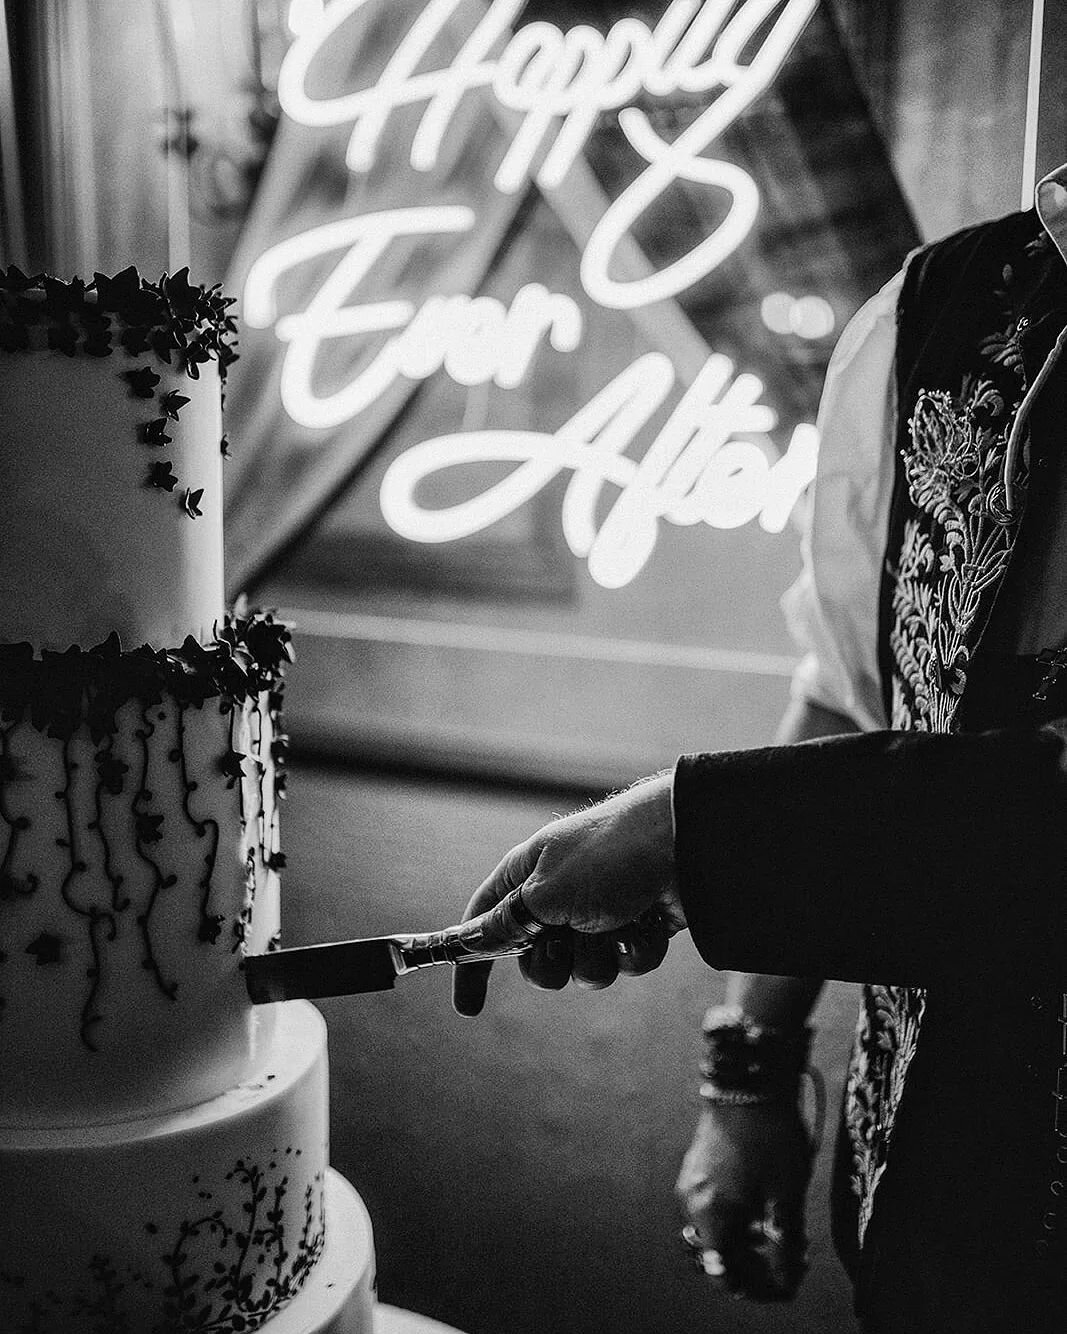 &quot;Happily Ever After&quot; @fairlawns_hotel

Stunning cake by @onecakestreet !
.
.
Suppliers:
@emexflowers 
@area51.entertainment 
#weddingphotography #wedding #lgbt #groomandgroom #loveauthentic #loveislove #weddinginspiration #ido #weddingphoto